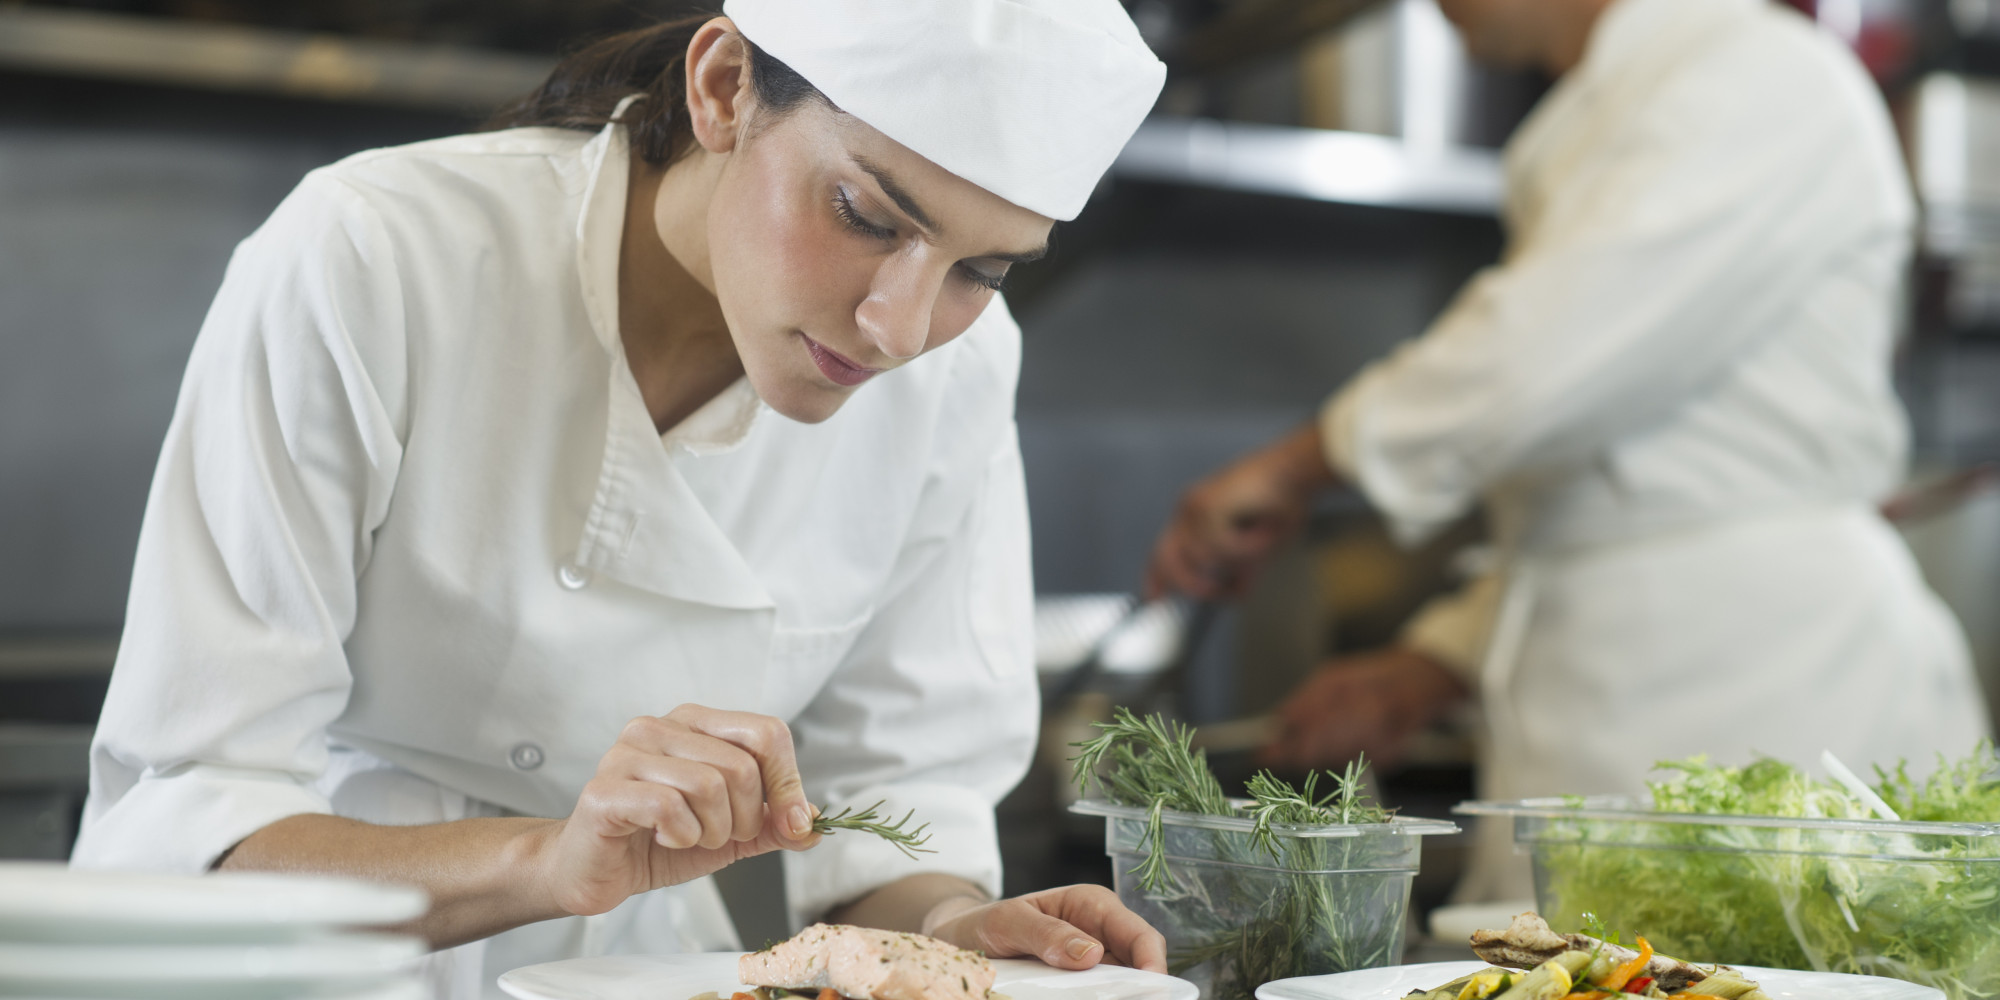 Duties of a Chef